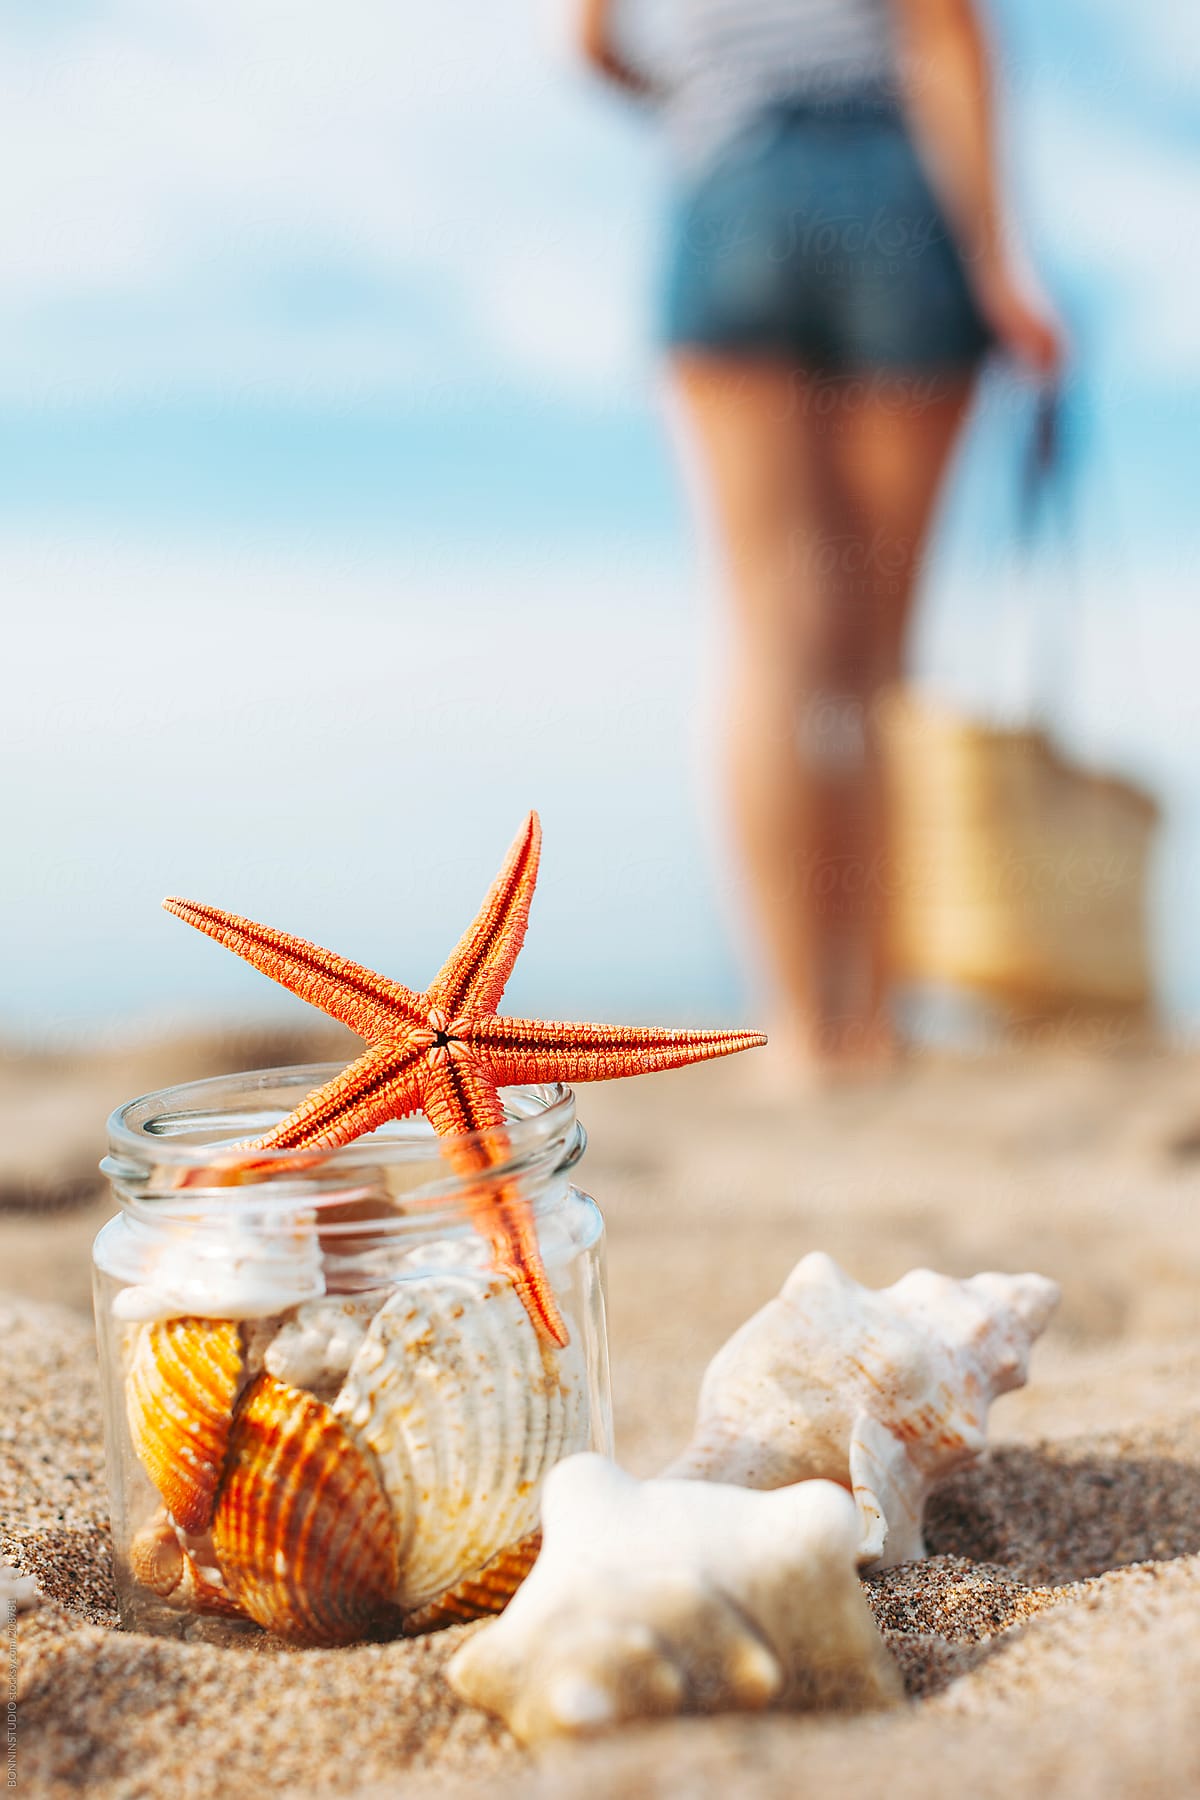 Starfish and shells inside a pot on the beach. Woman standing with straw basket on the background.